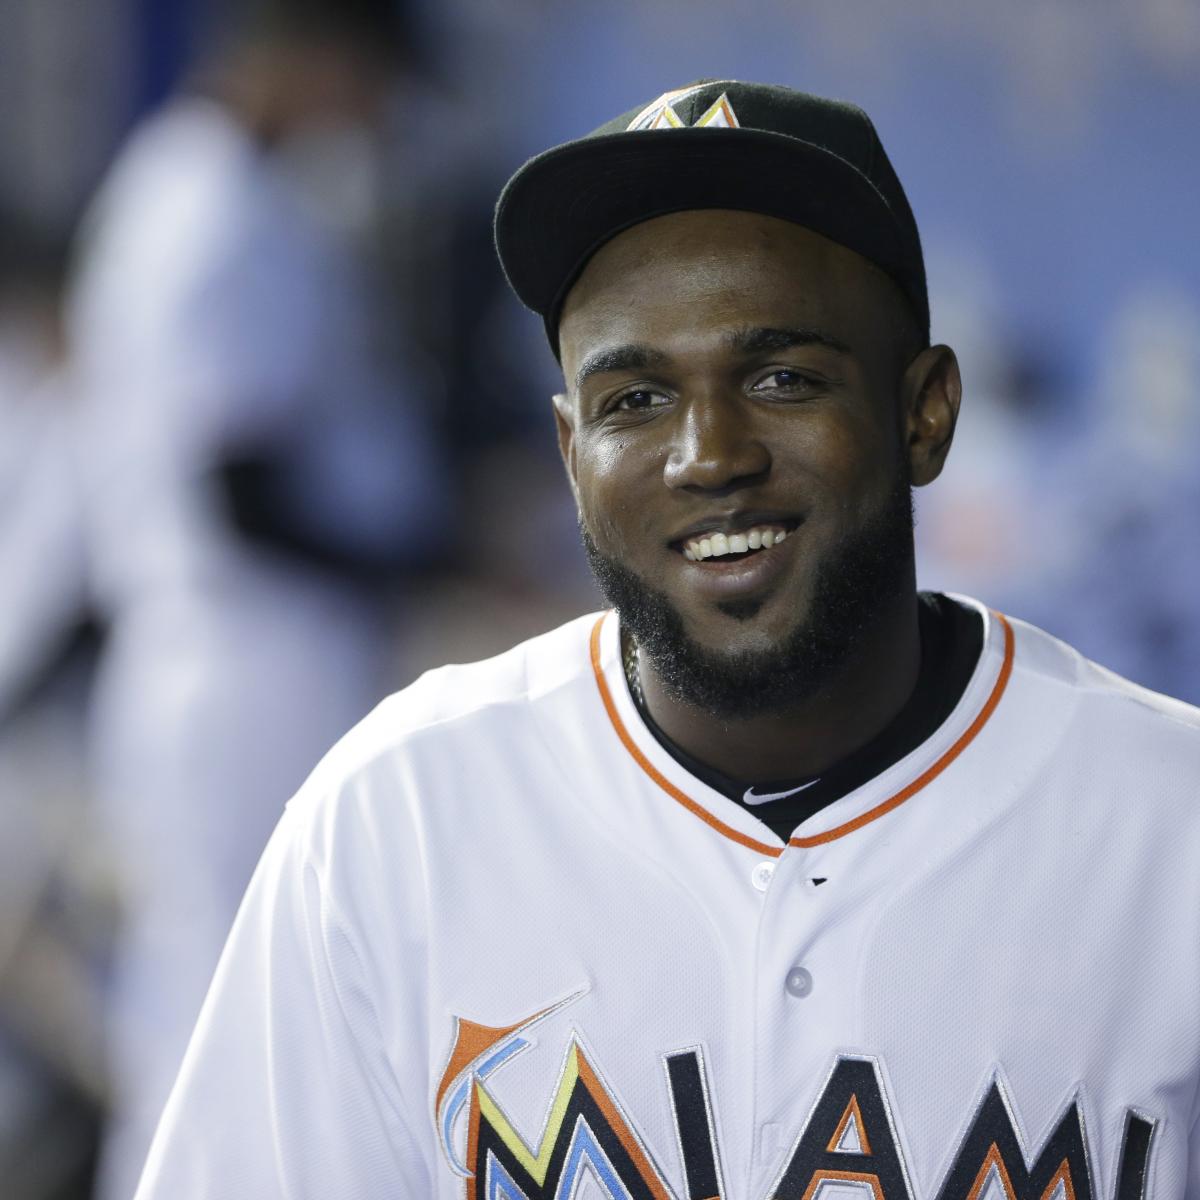 Rookie Marcell Ozuna could shake up Miami Marlins' outfield if he